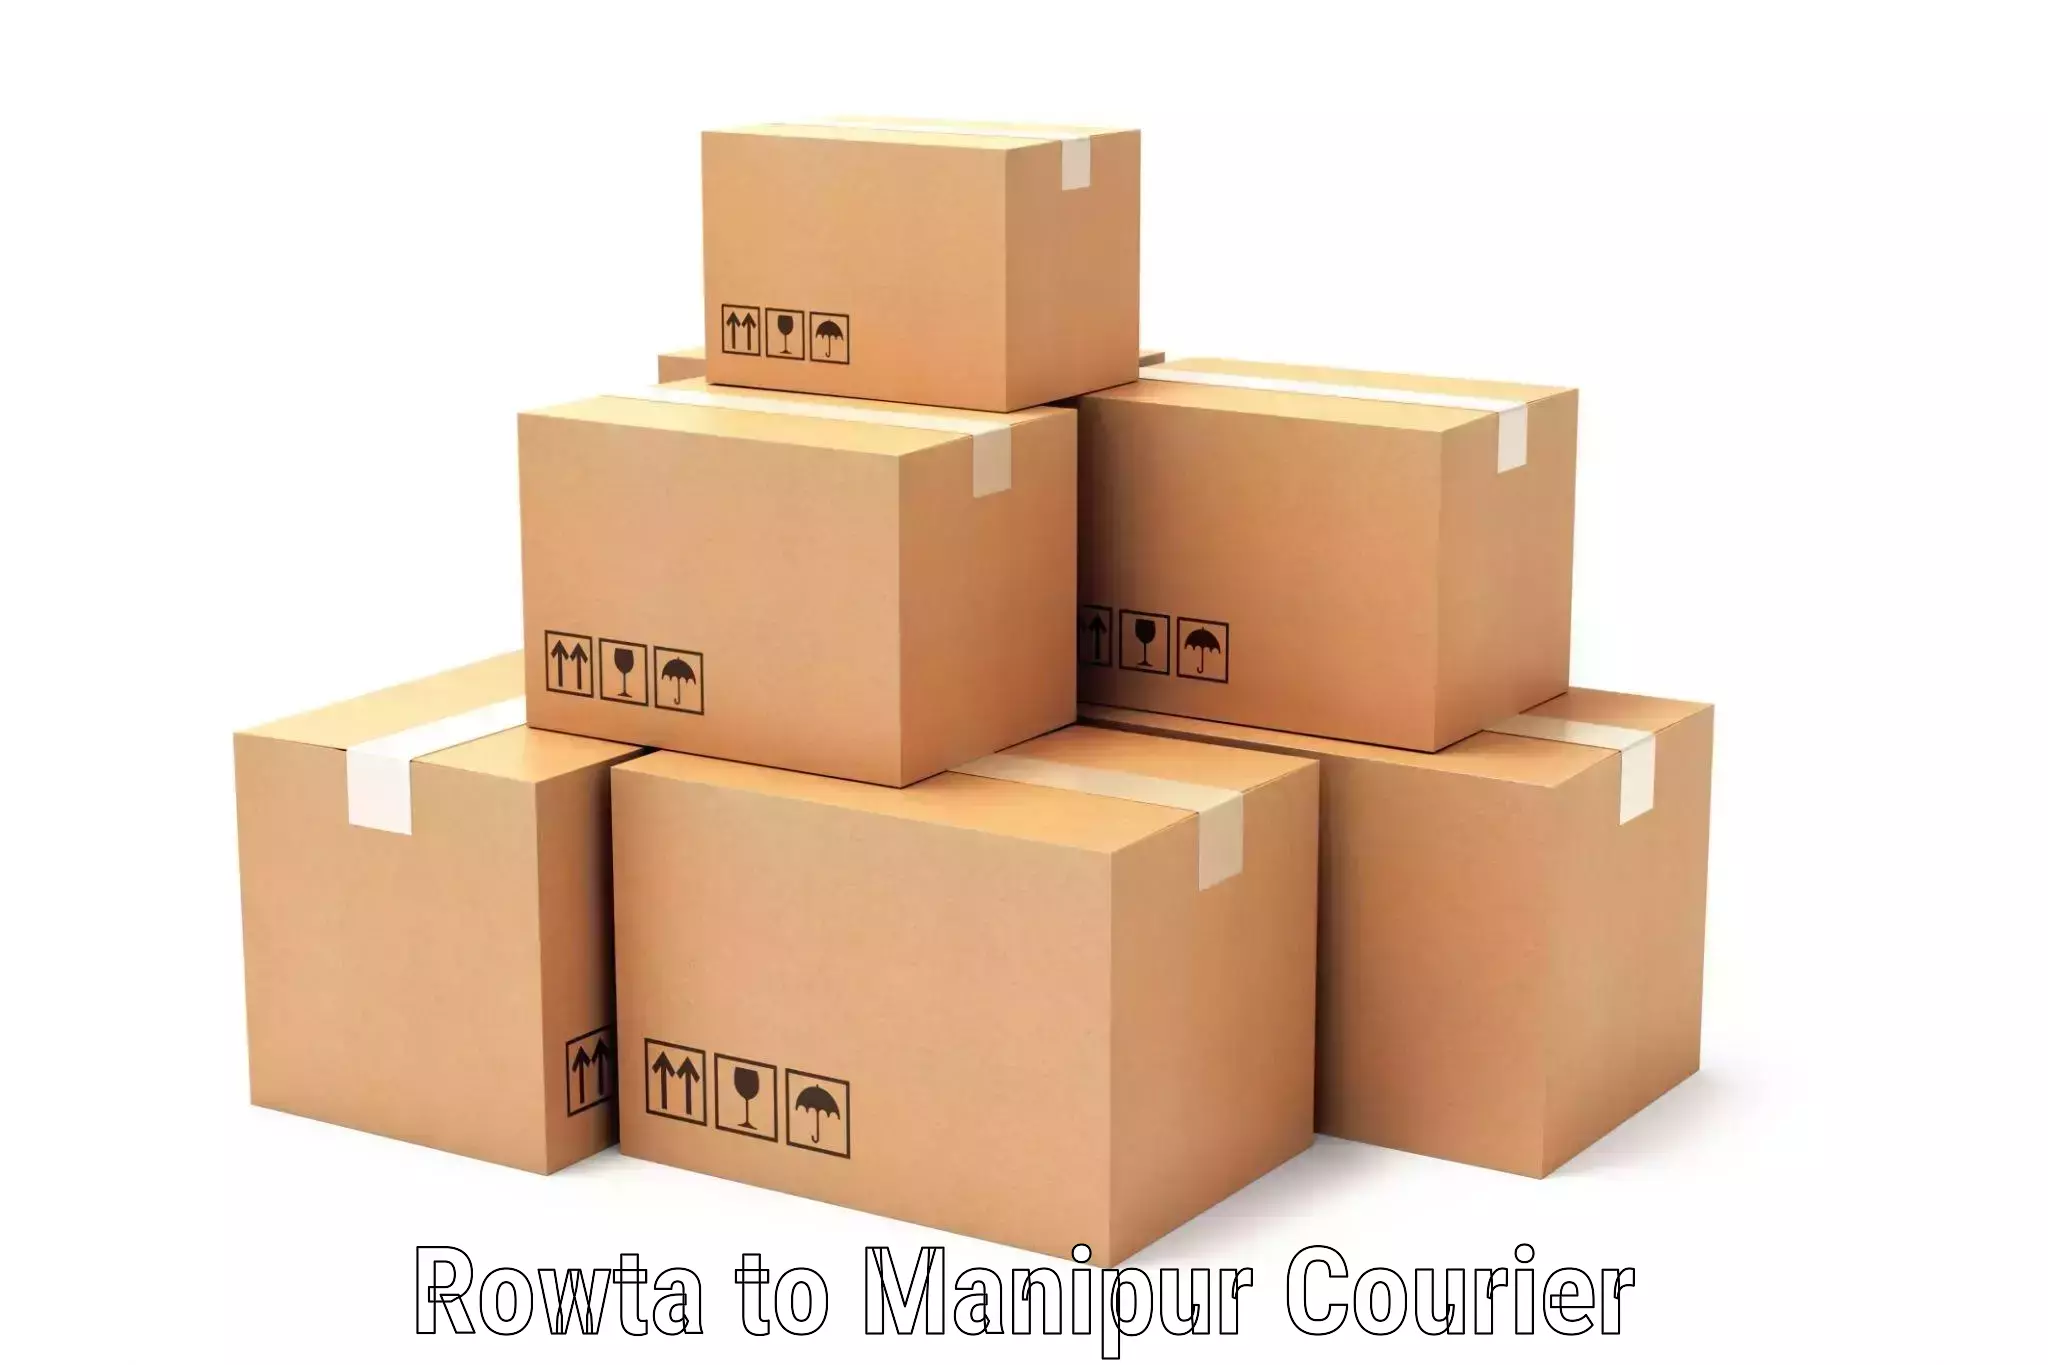 Business delivery service Rowta to Manipur